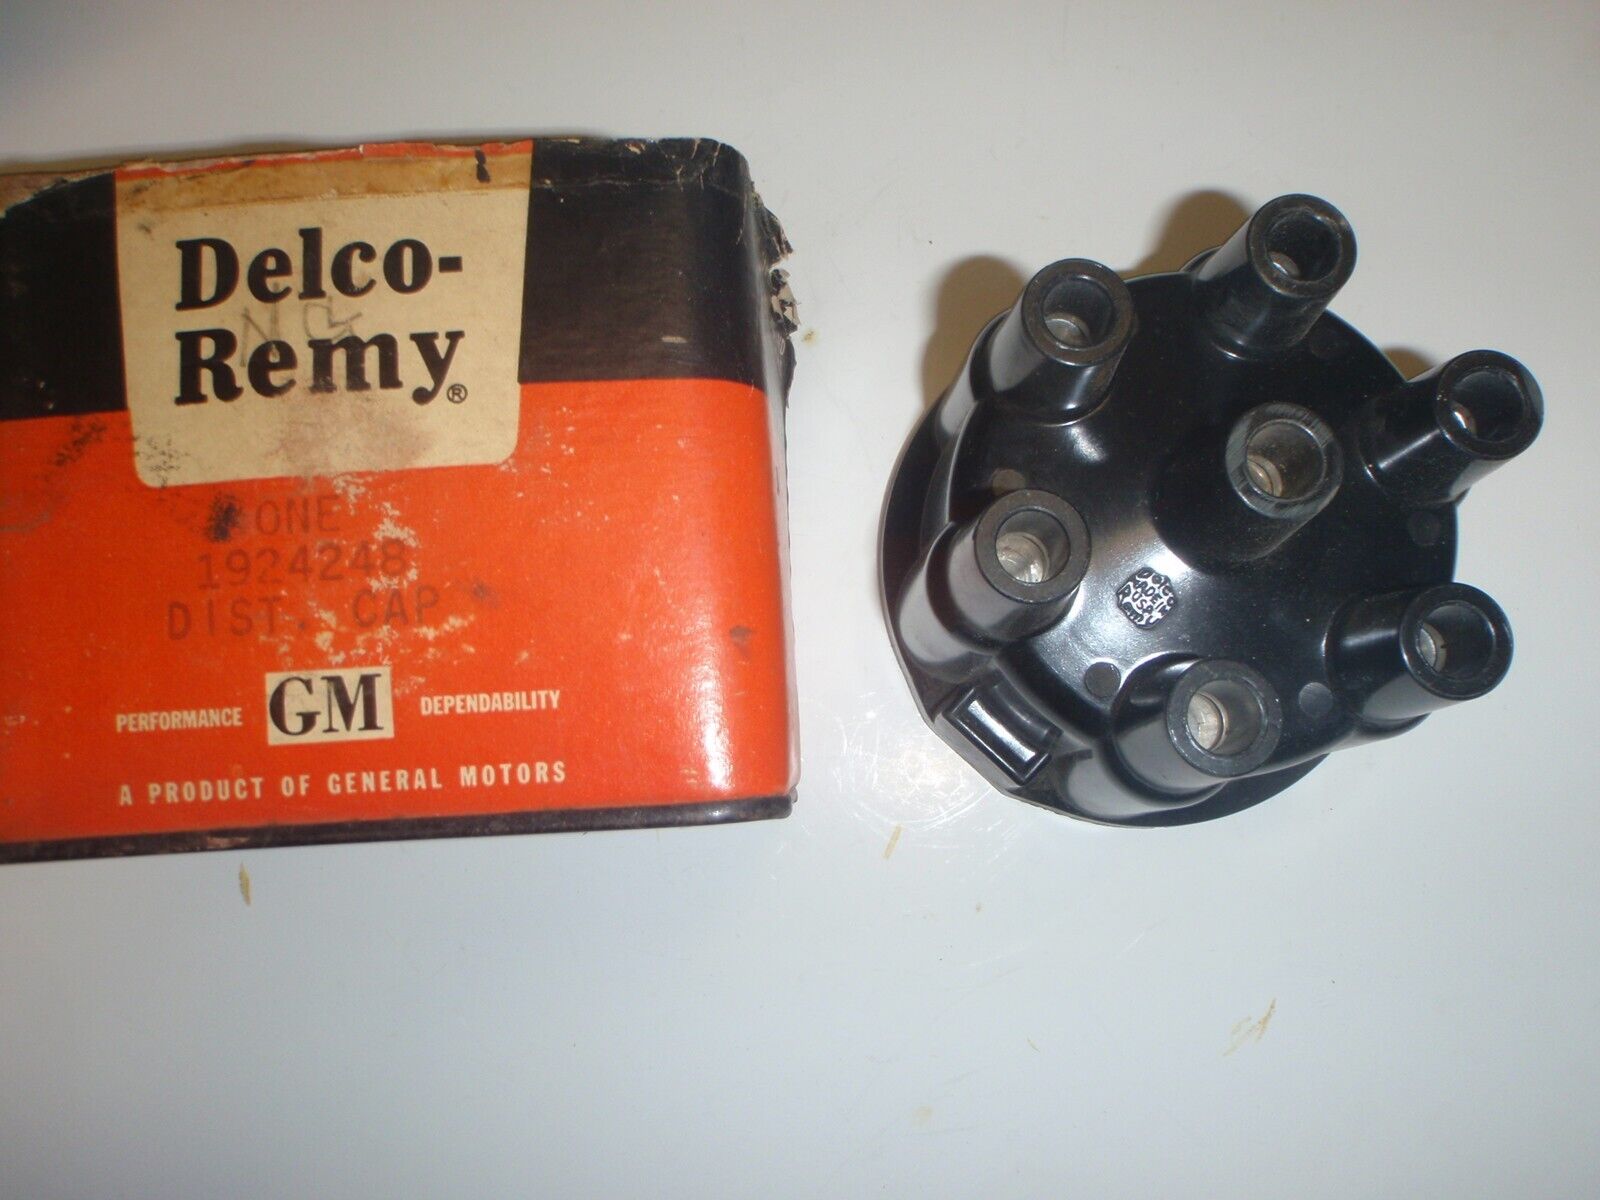 NOS DELCO REMY GM Ignition Distributor Cap 1953-1962 Chevrolet 6-cyl CHEVY